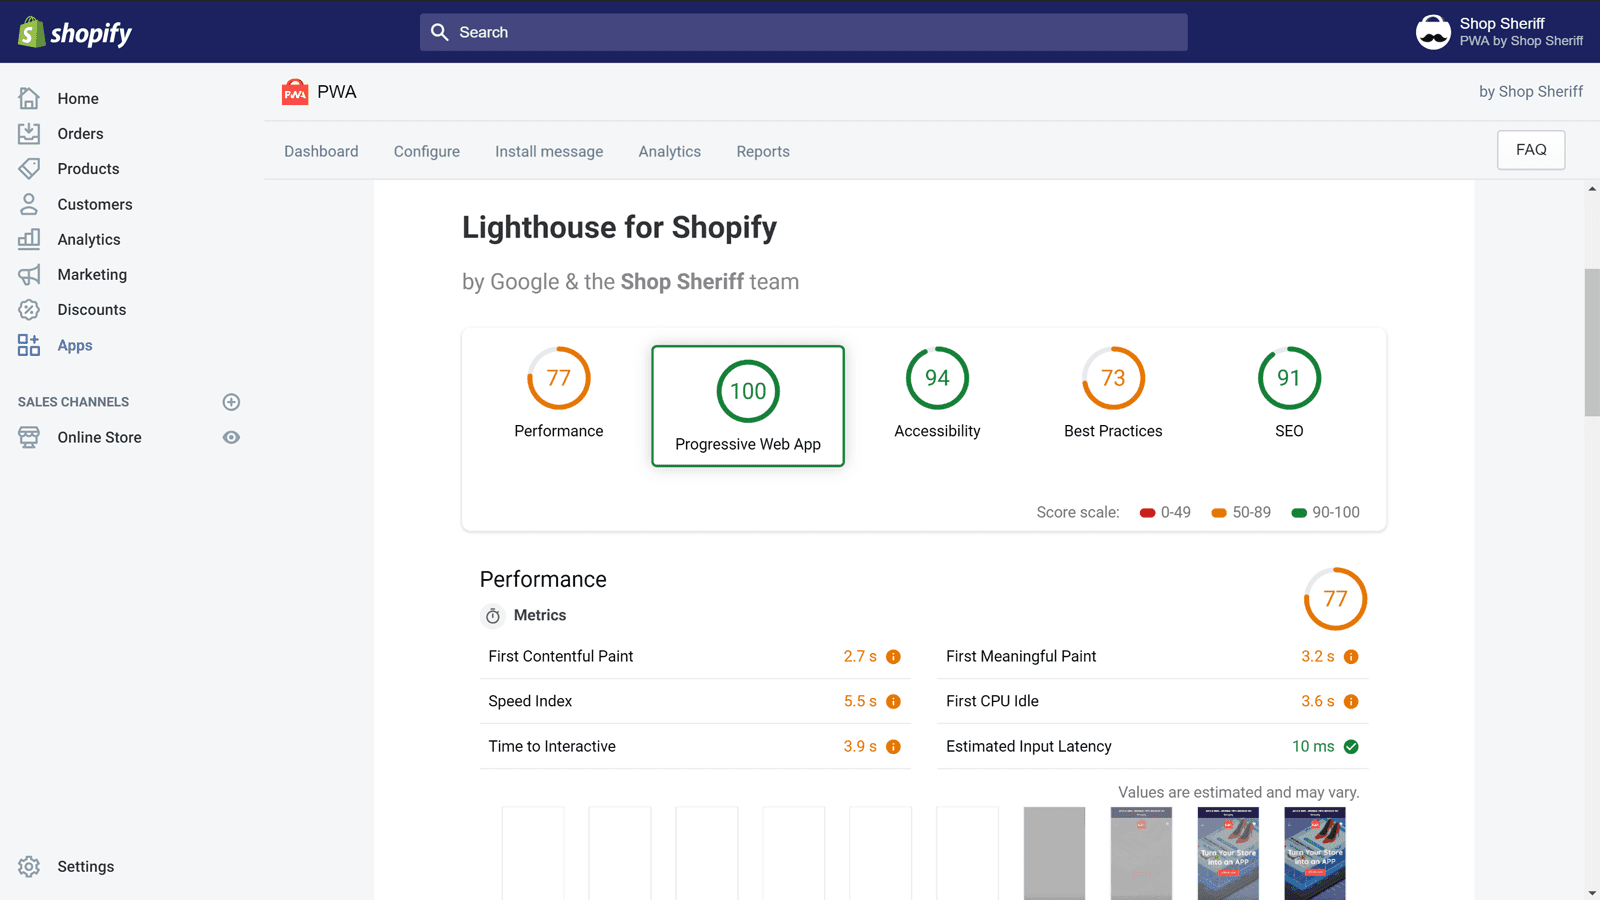 PWA by Shop Sheriff and their Lighthouse integration